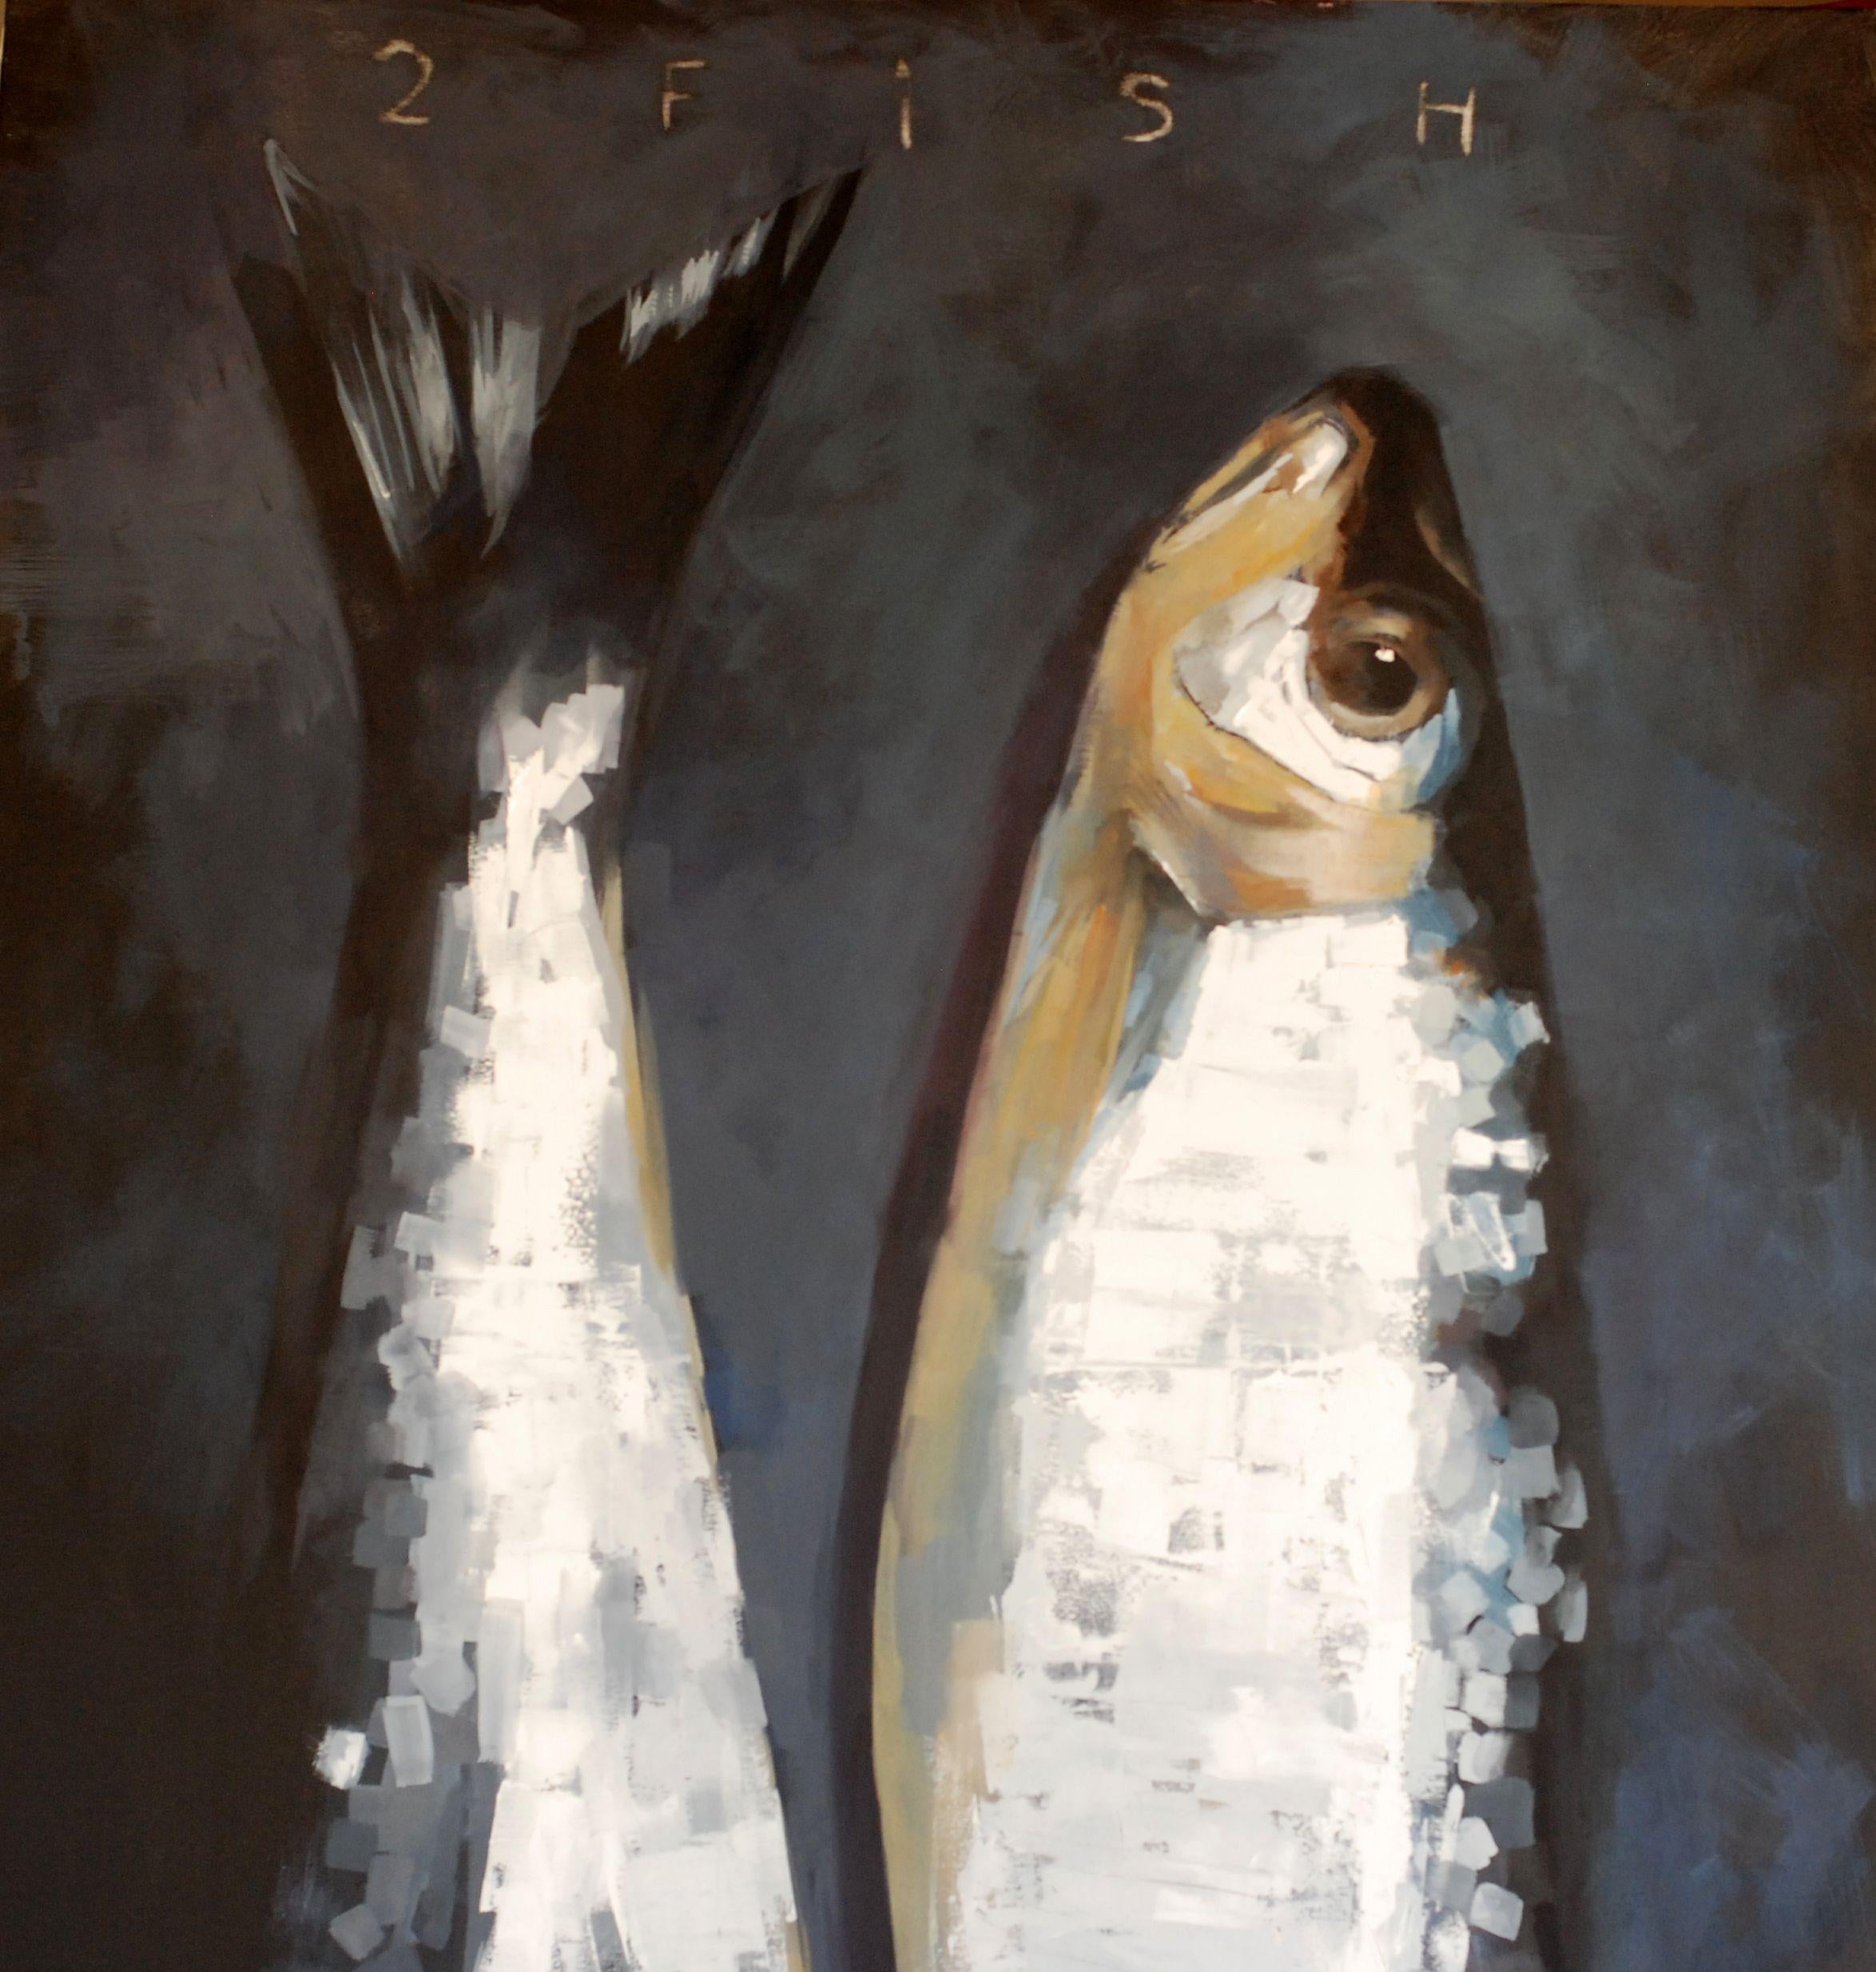 2 fish., Painting, Oil on Canvas 3